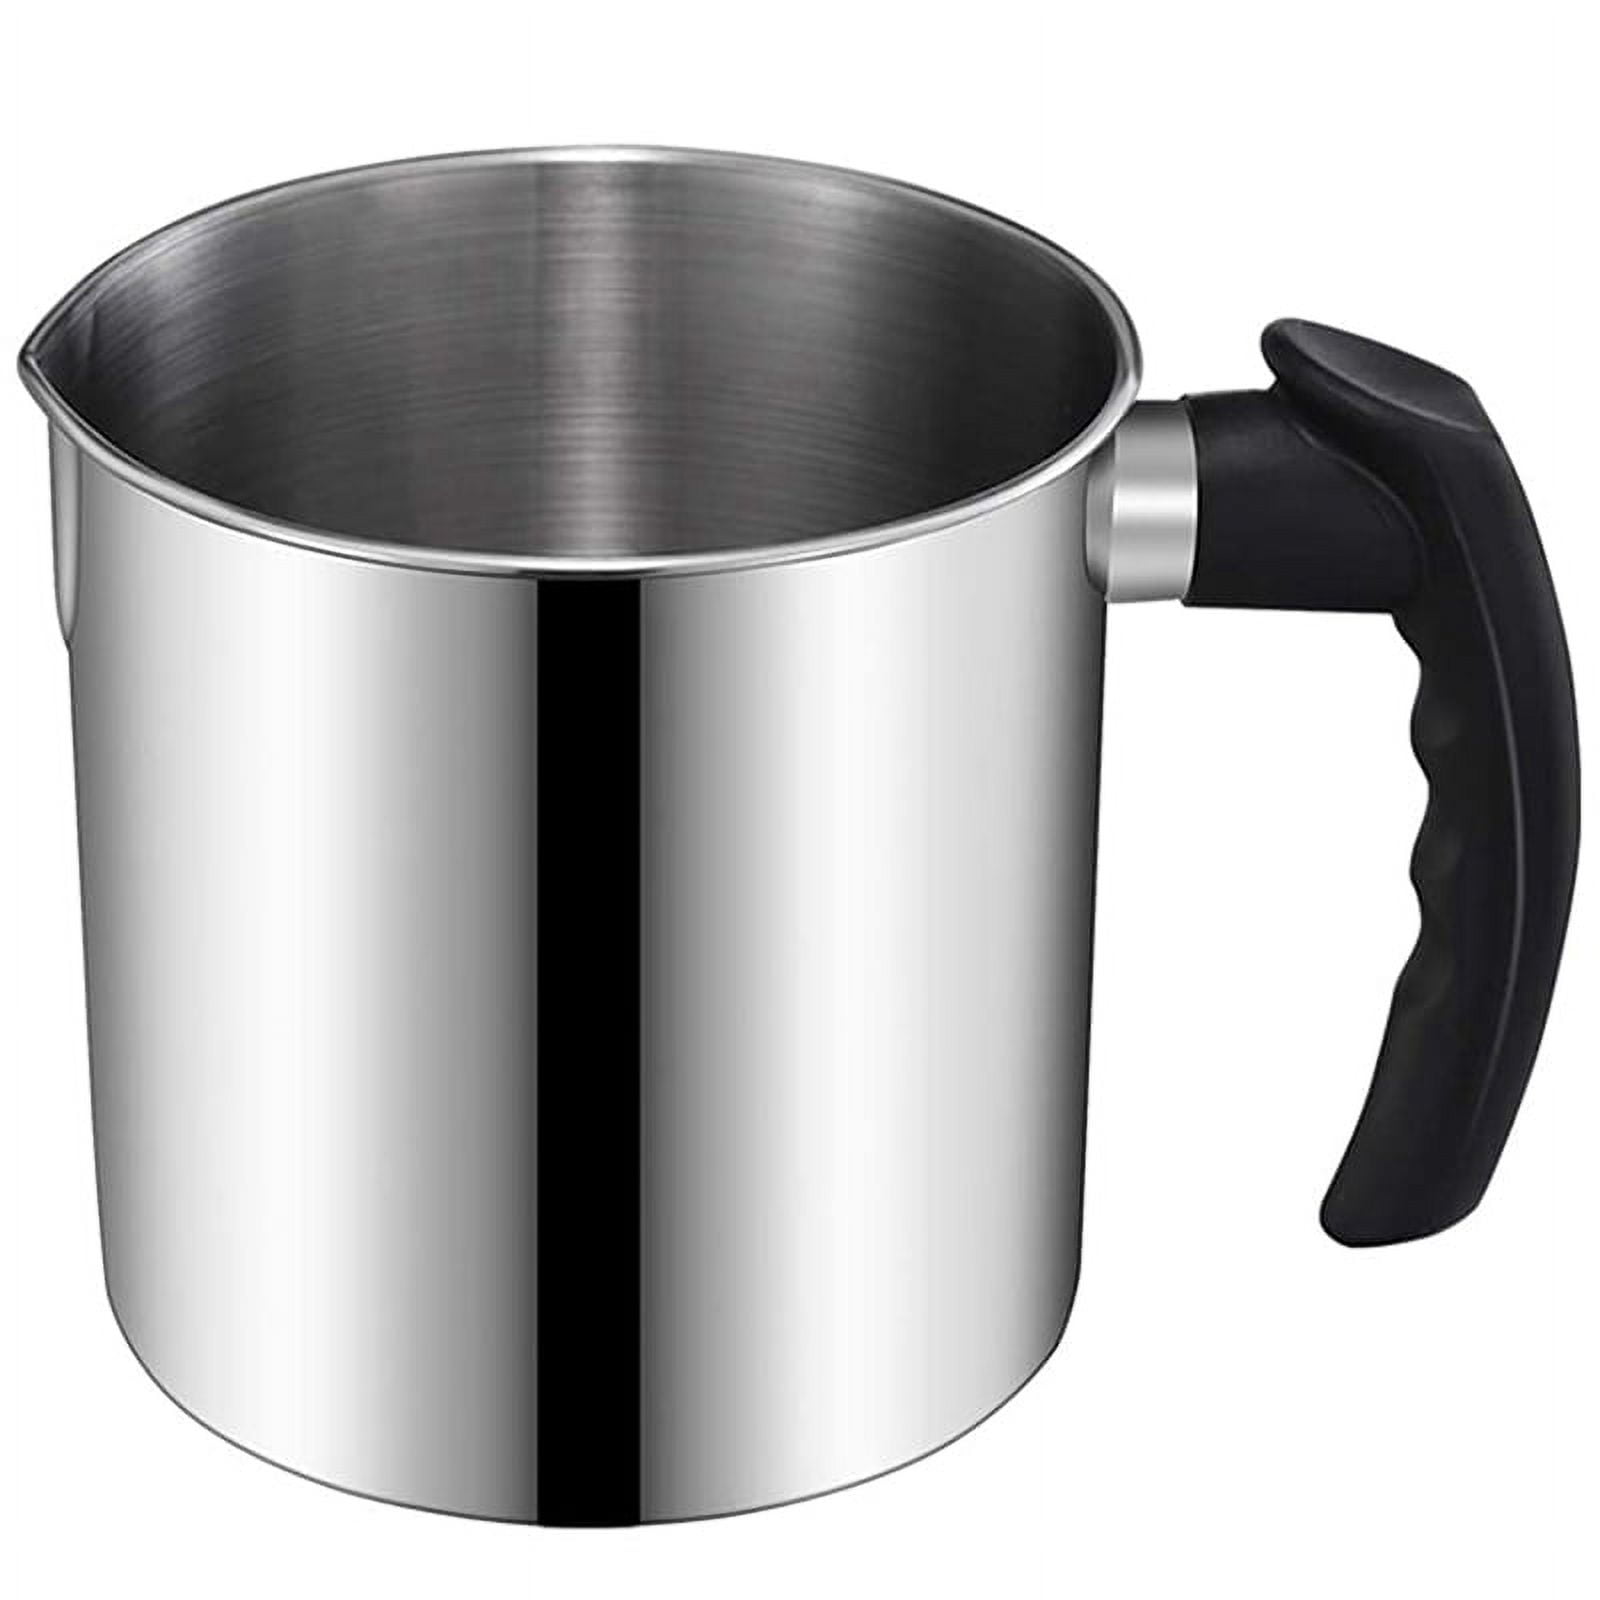 Generic Candle Making Pouring Pot, 44 Oz Double Boiler Wax Melting P @ Best  Price Online